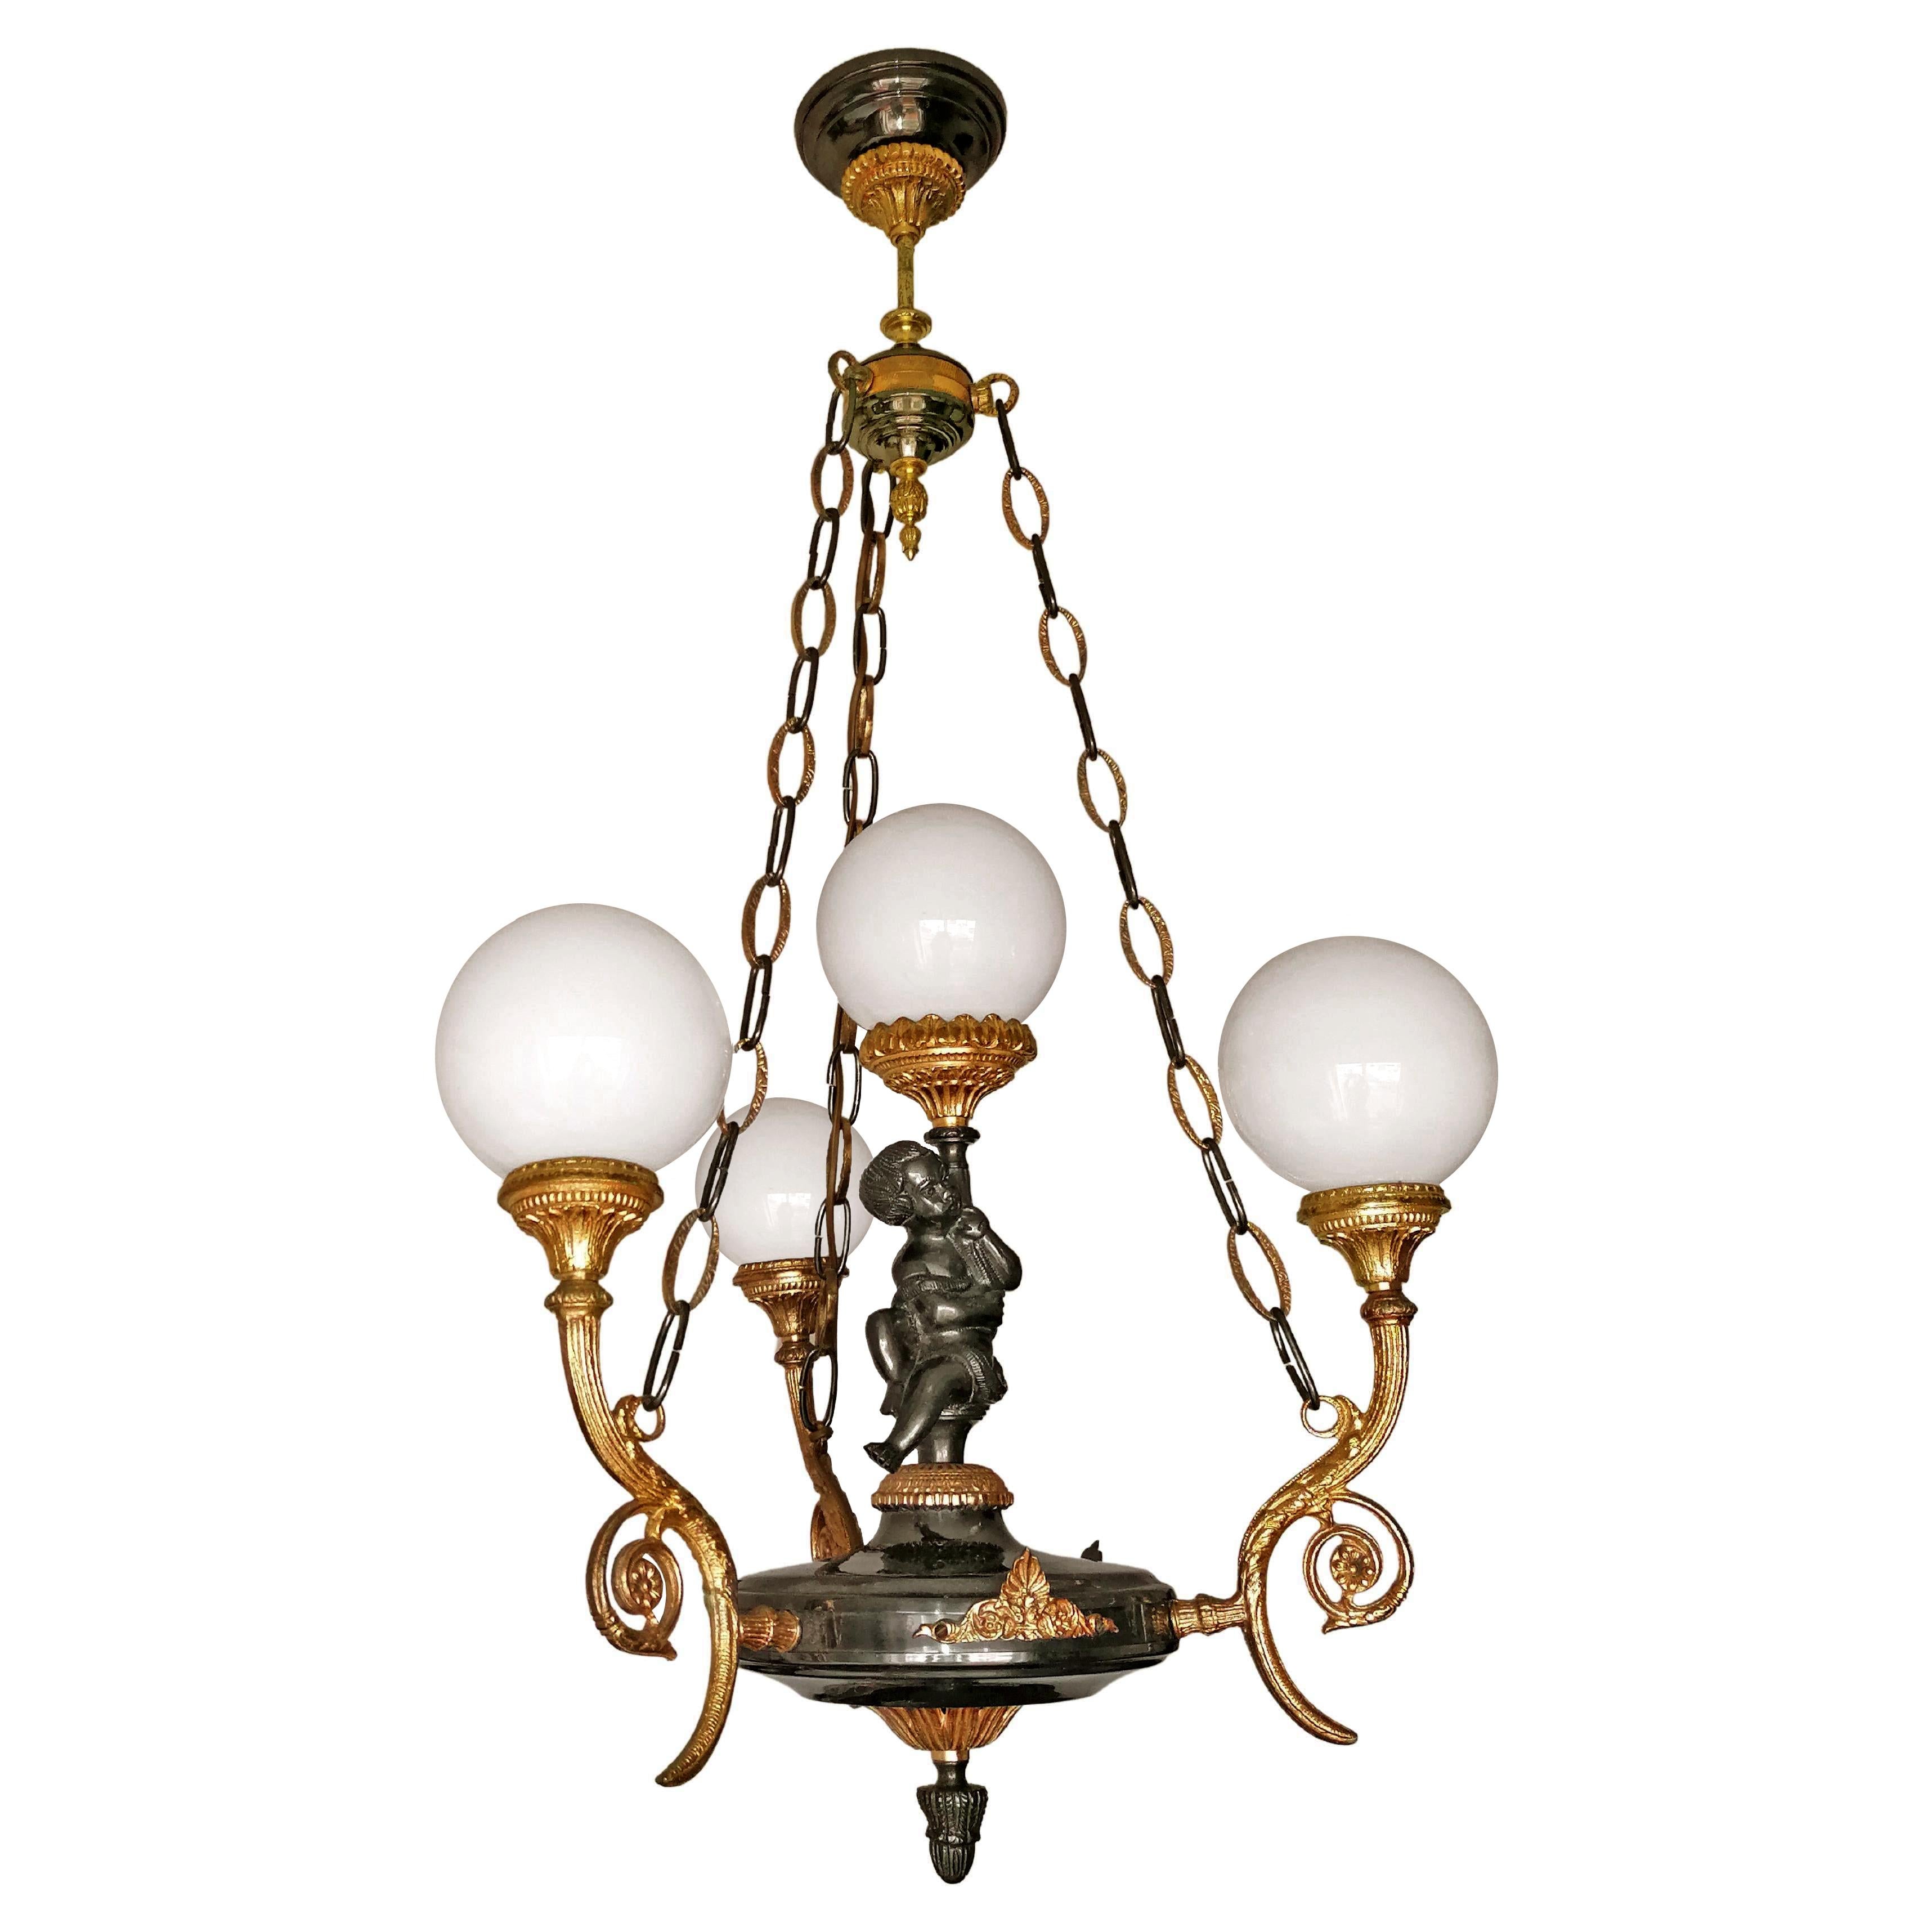 Spectacular neoclassical French Empire gilt bronze 4-light chandelier, patinated and gold-plated solid bronze

Dimensions
Height 39.38 in. (100 cm)
Diameter 23.63 in. (60 cm)
Glass shades, 6 in (15 cm)
4-light bulbs E 14/good working